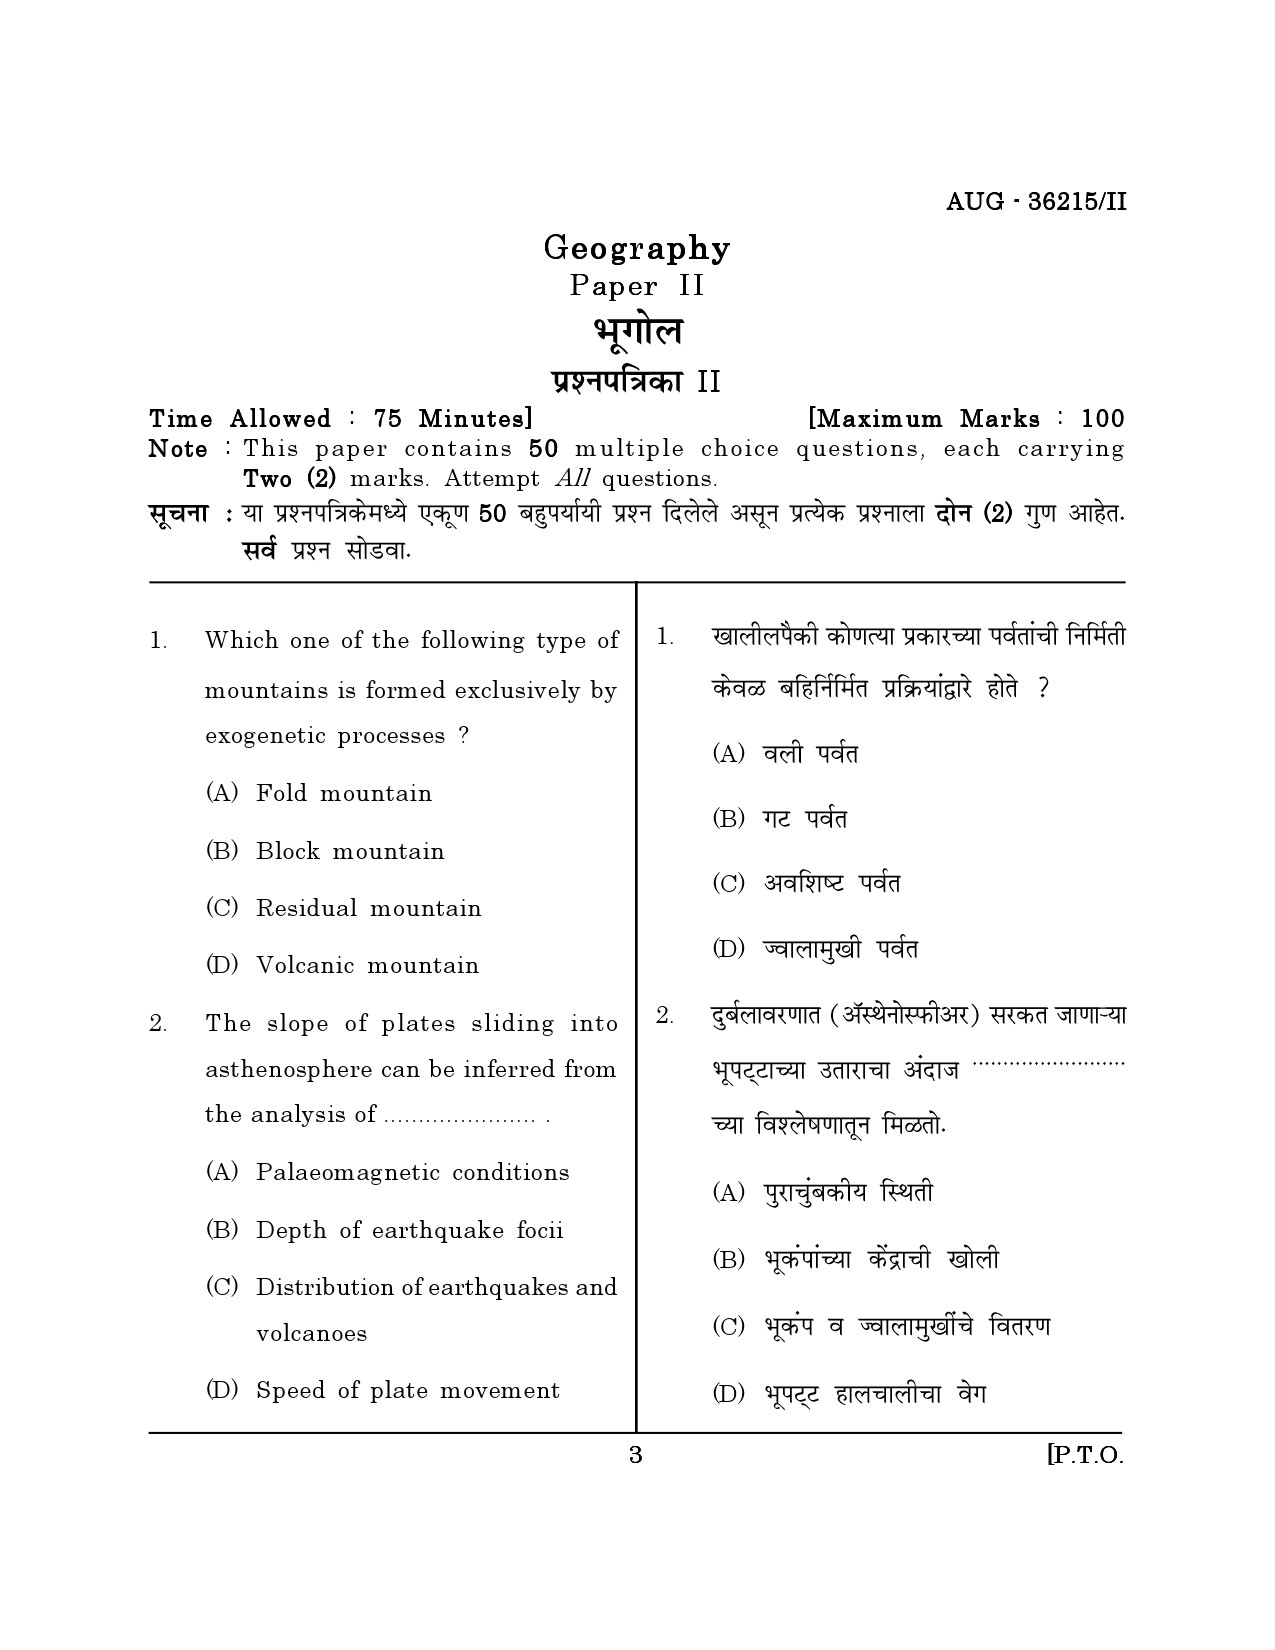 Maharashtra SET Geography Question Paper II August 2015 2